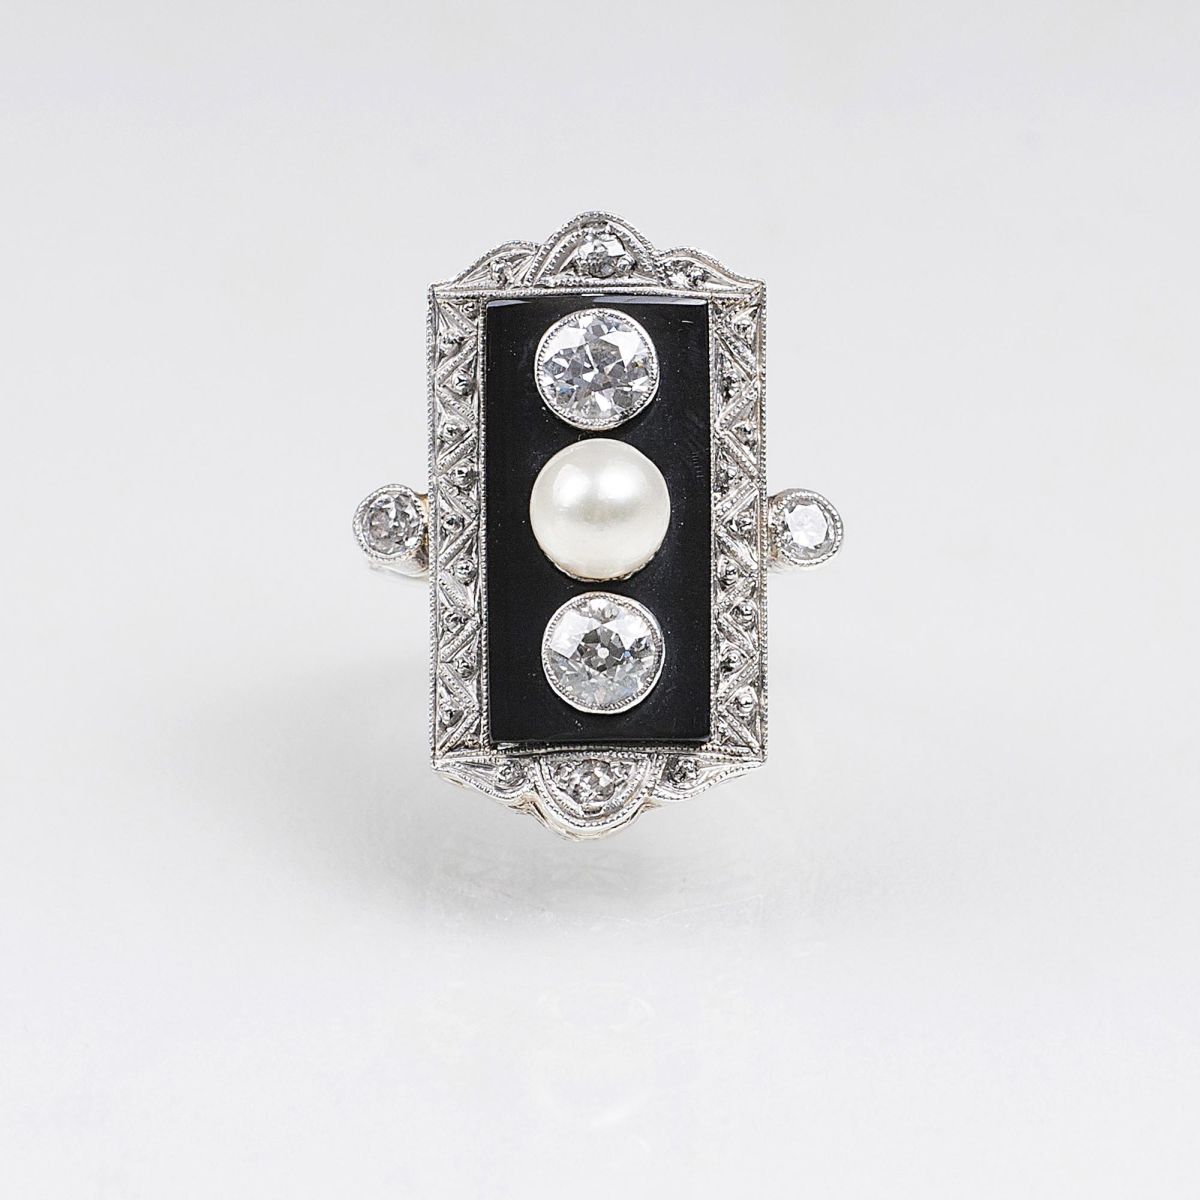 An Art-déco Diamond Pearl Ring with Onyx Setting